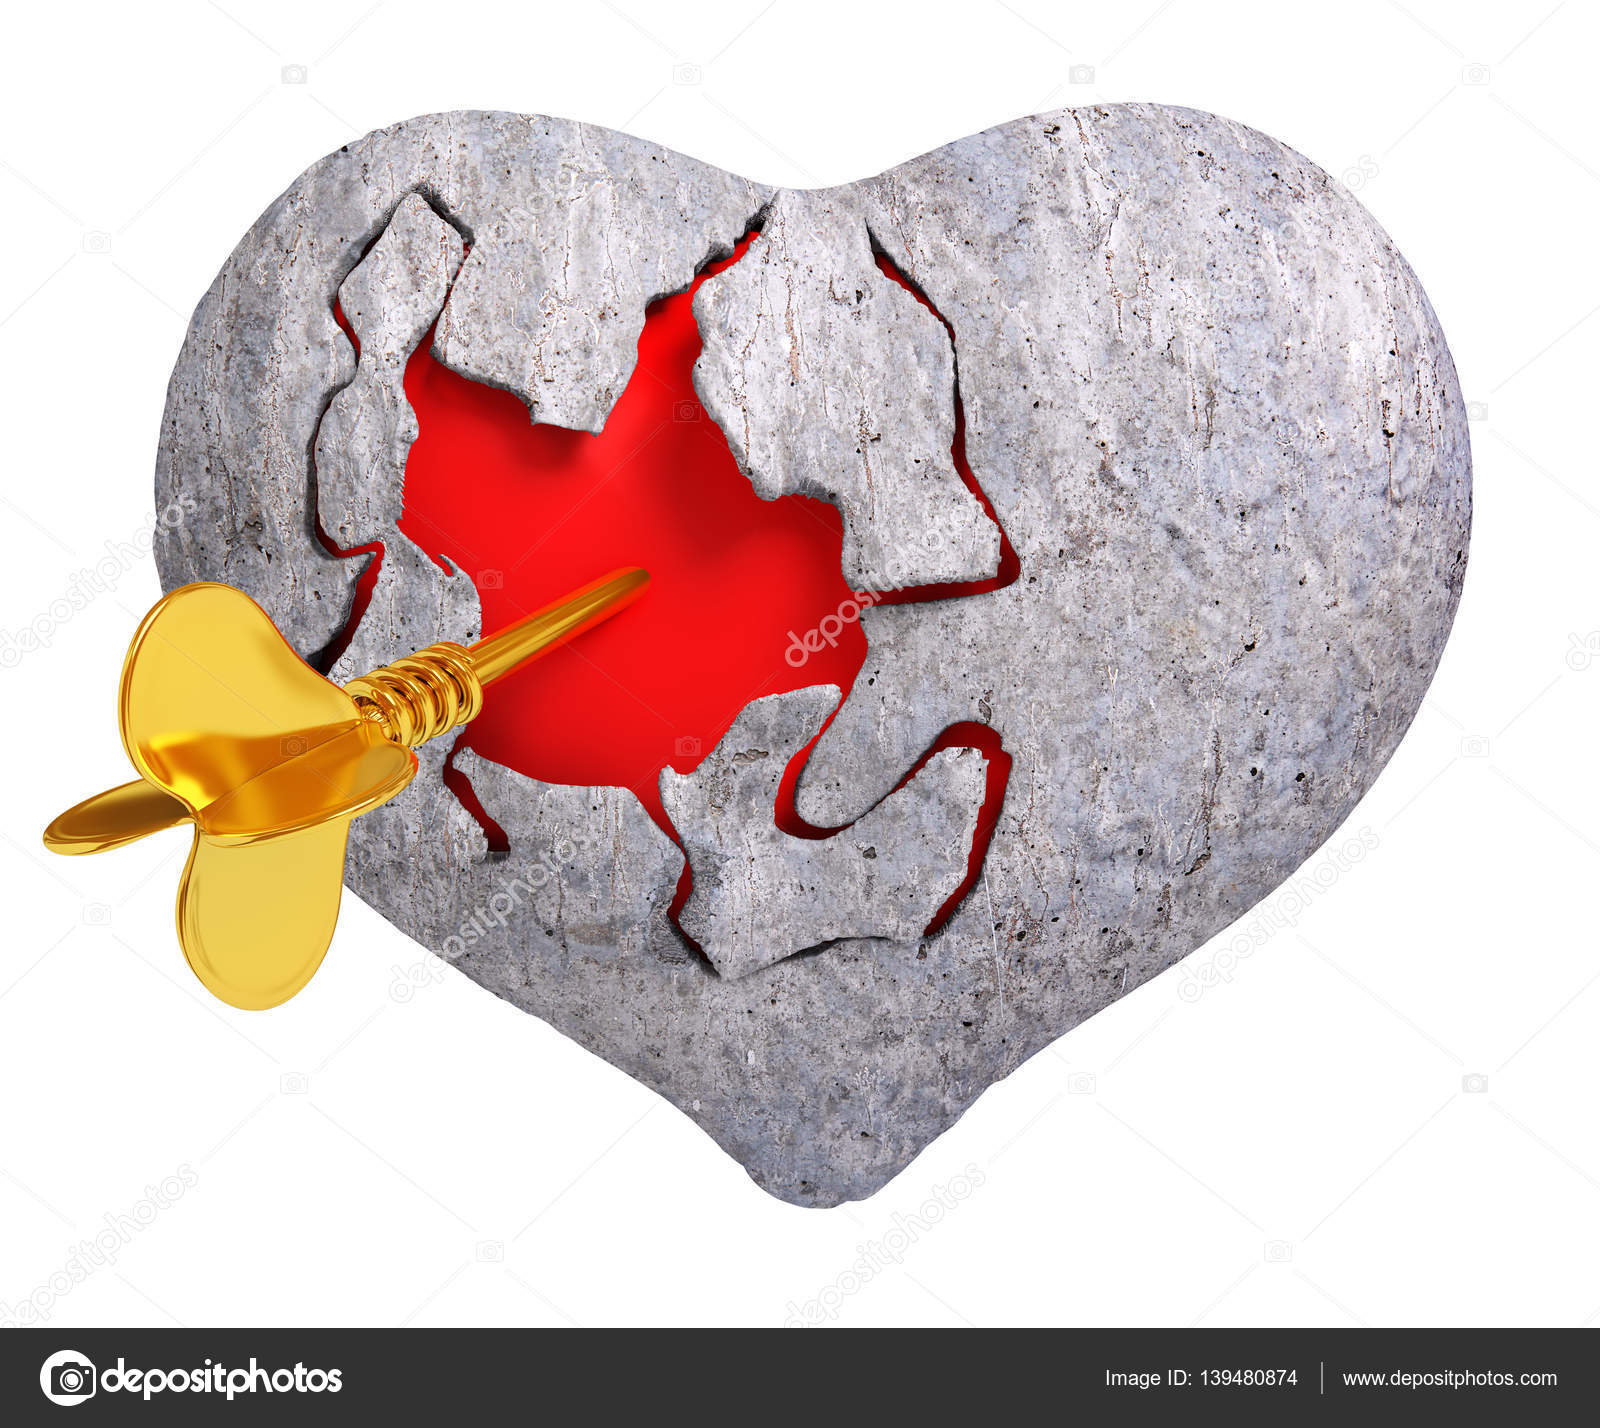 Broken stone heart with red inside it, and Cupid's arrow, 3d re ...